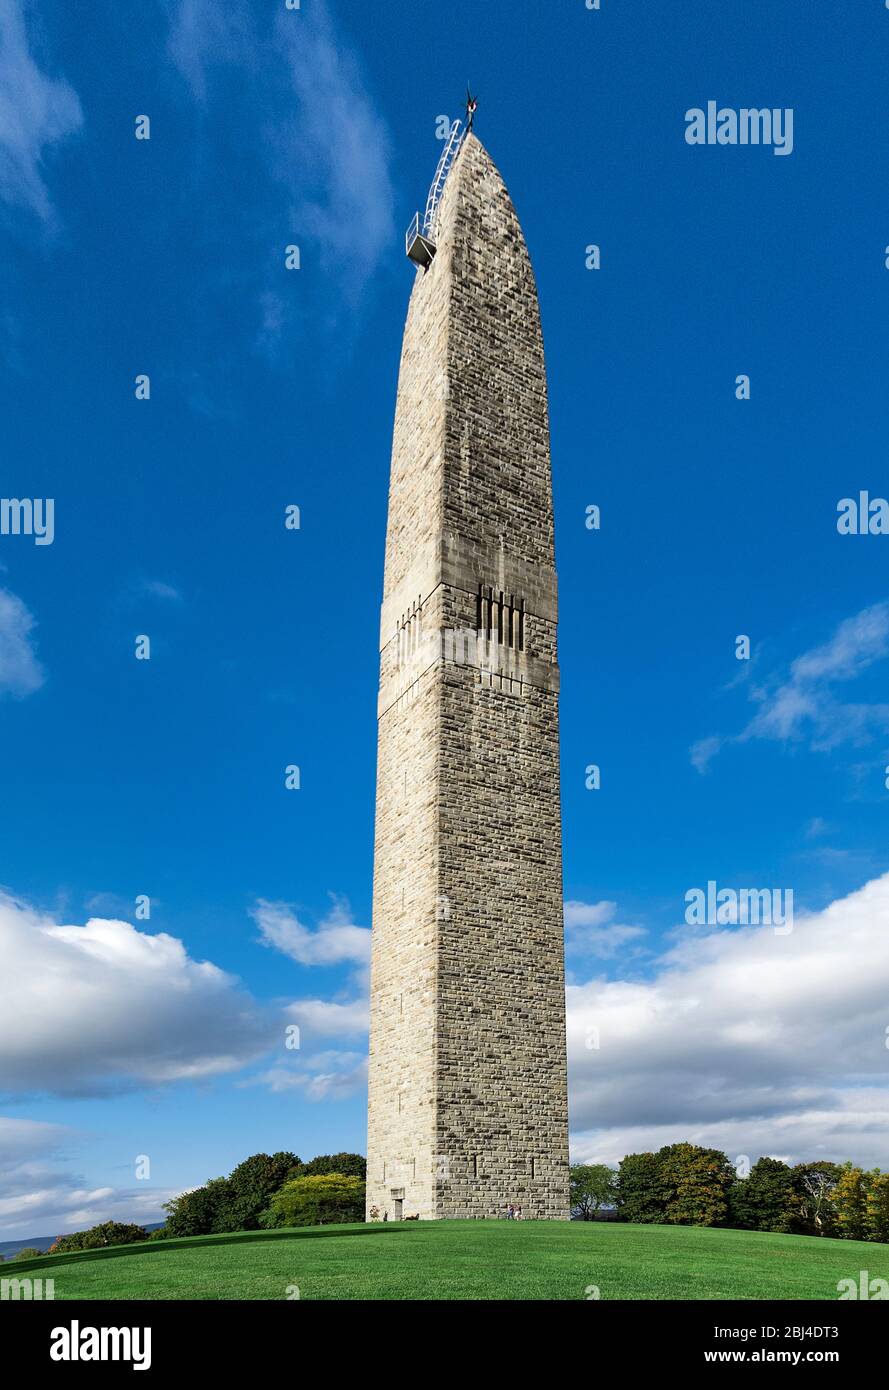 The Bennington Battle Monument which is the tallest structure in Vermont. Stock Photo